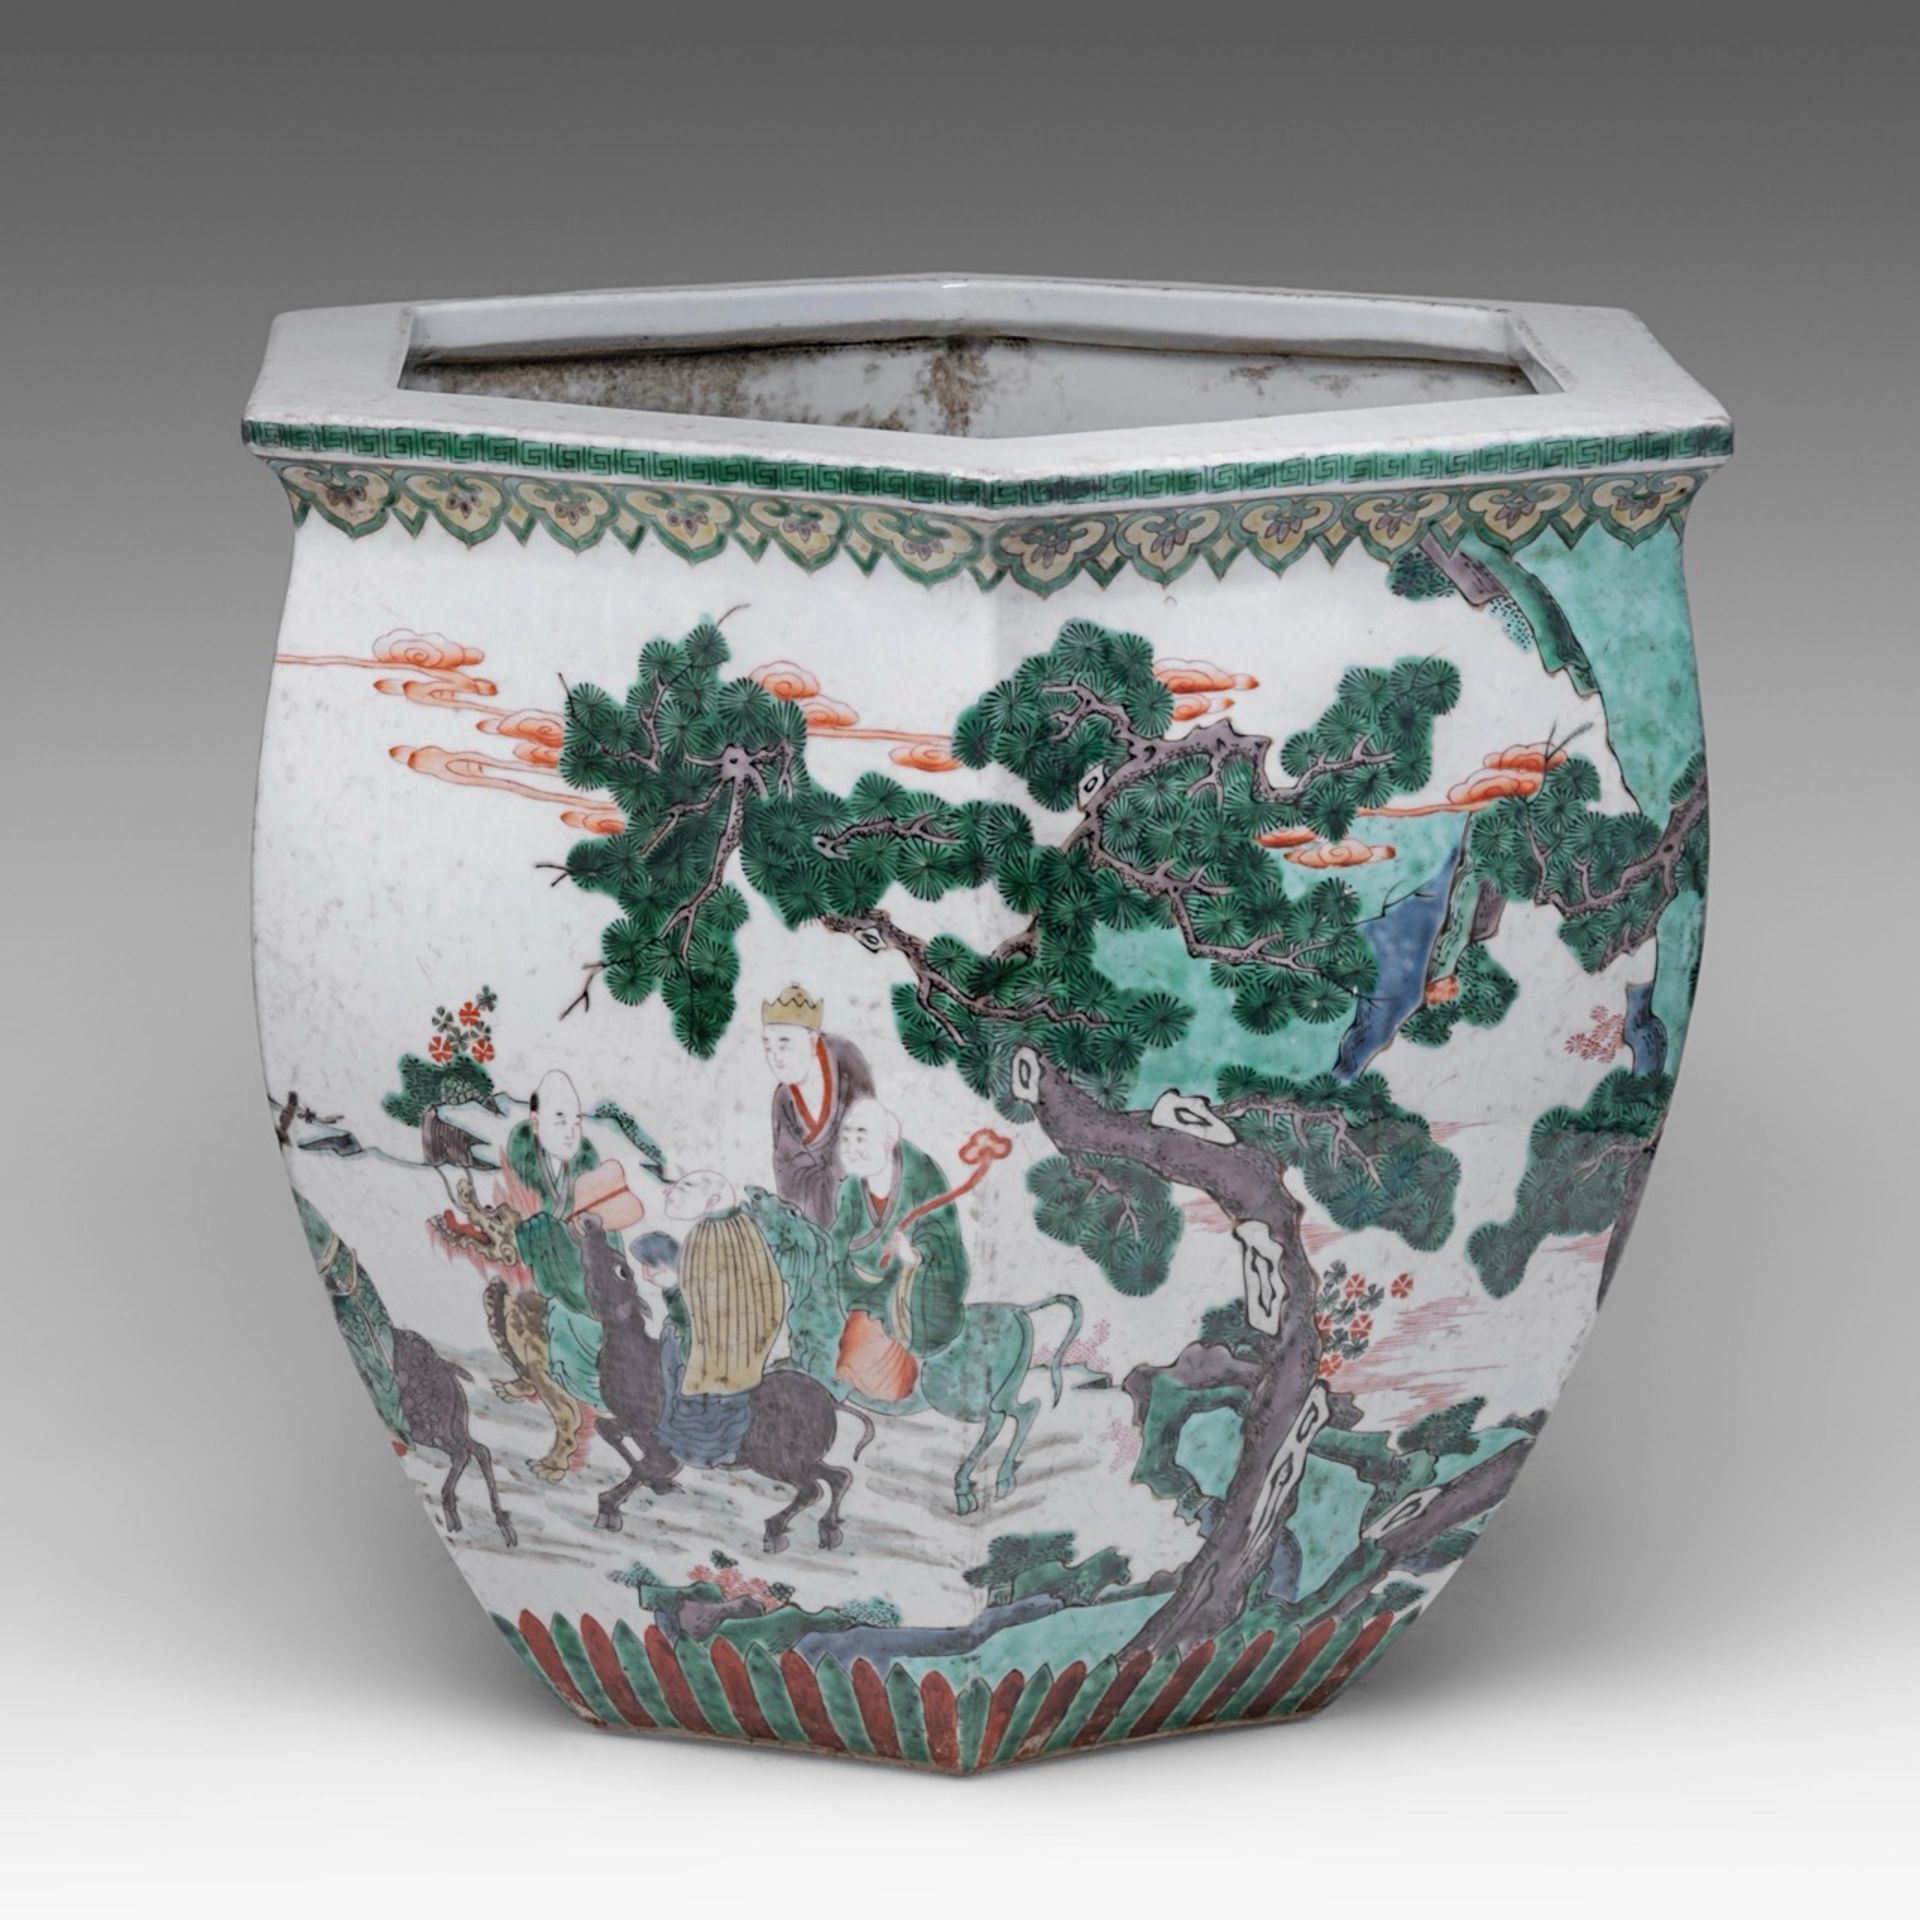 A Chinese famille verte 'Immortals' hexagonal jardiniere, Republic period/ 20thC, H 37 - W 46 cm - Image 2 of 6